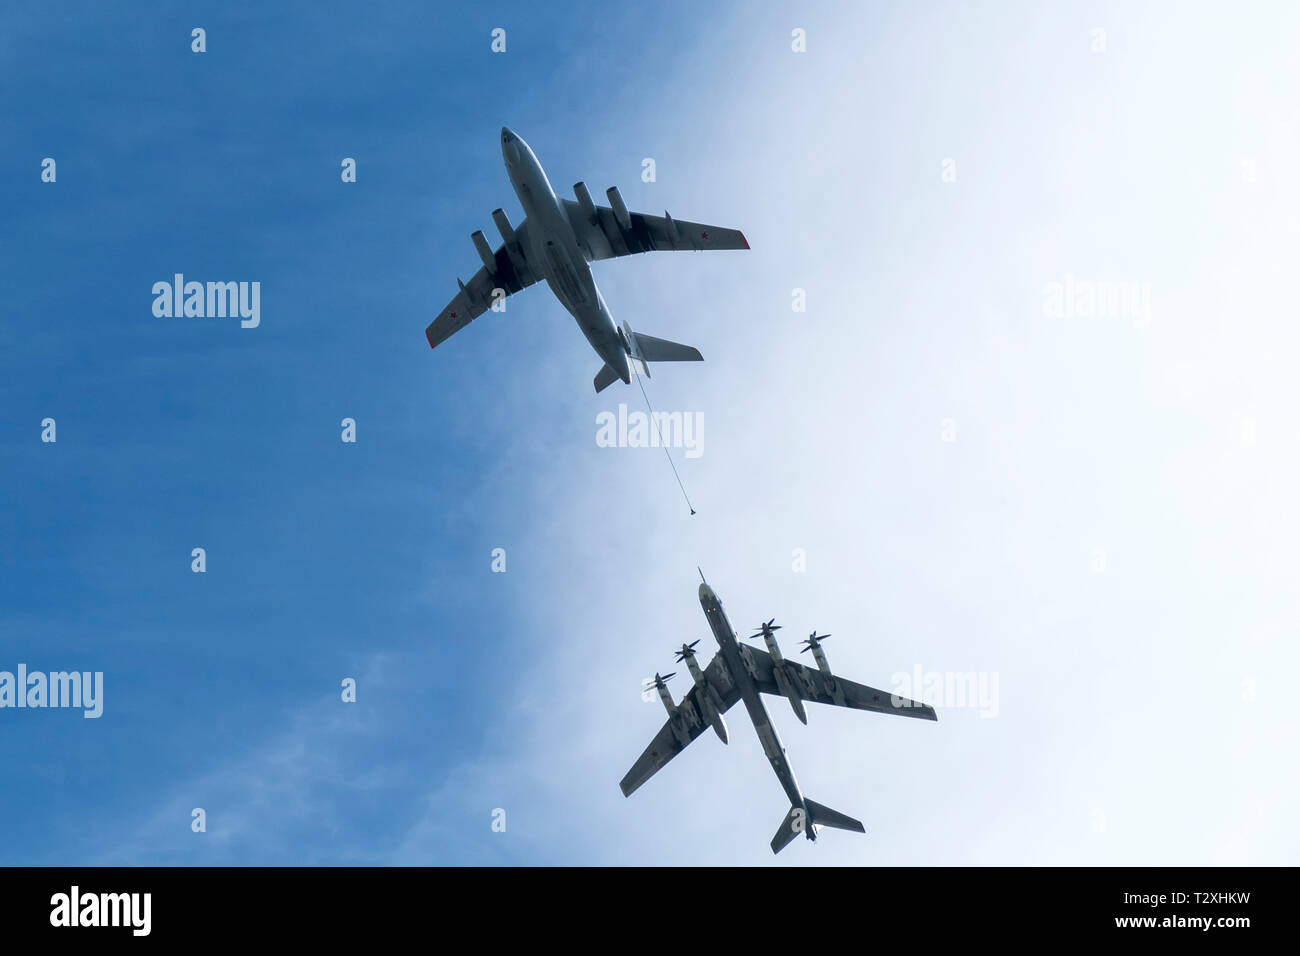 Air tanker Ilyushin IL-78 and Strategic bomber Tu-95 'Bear' simulate in-flight refueling at Parade of Victory in World War II. Russian planes Stock Photo